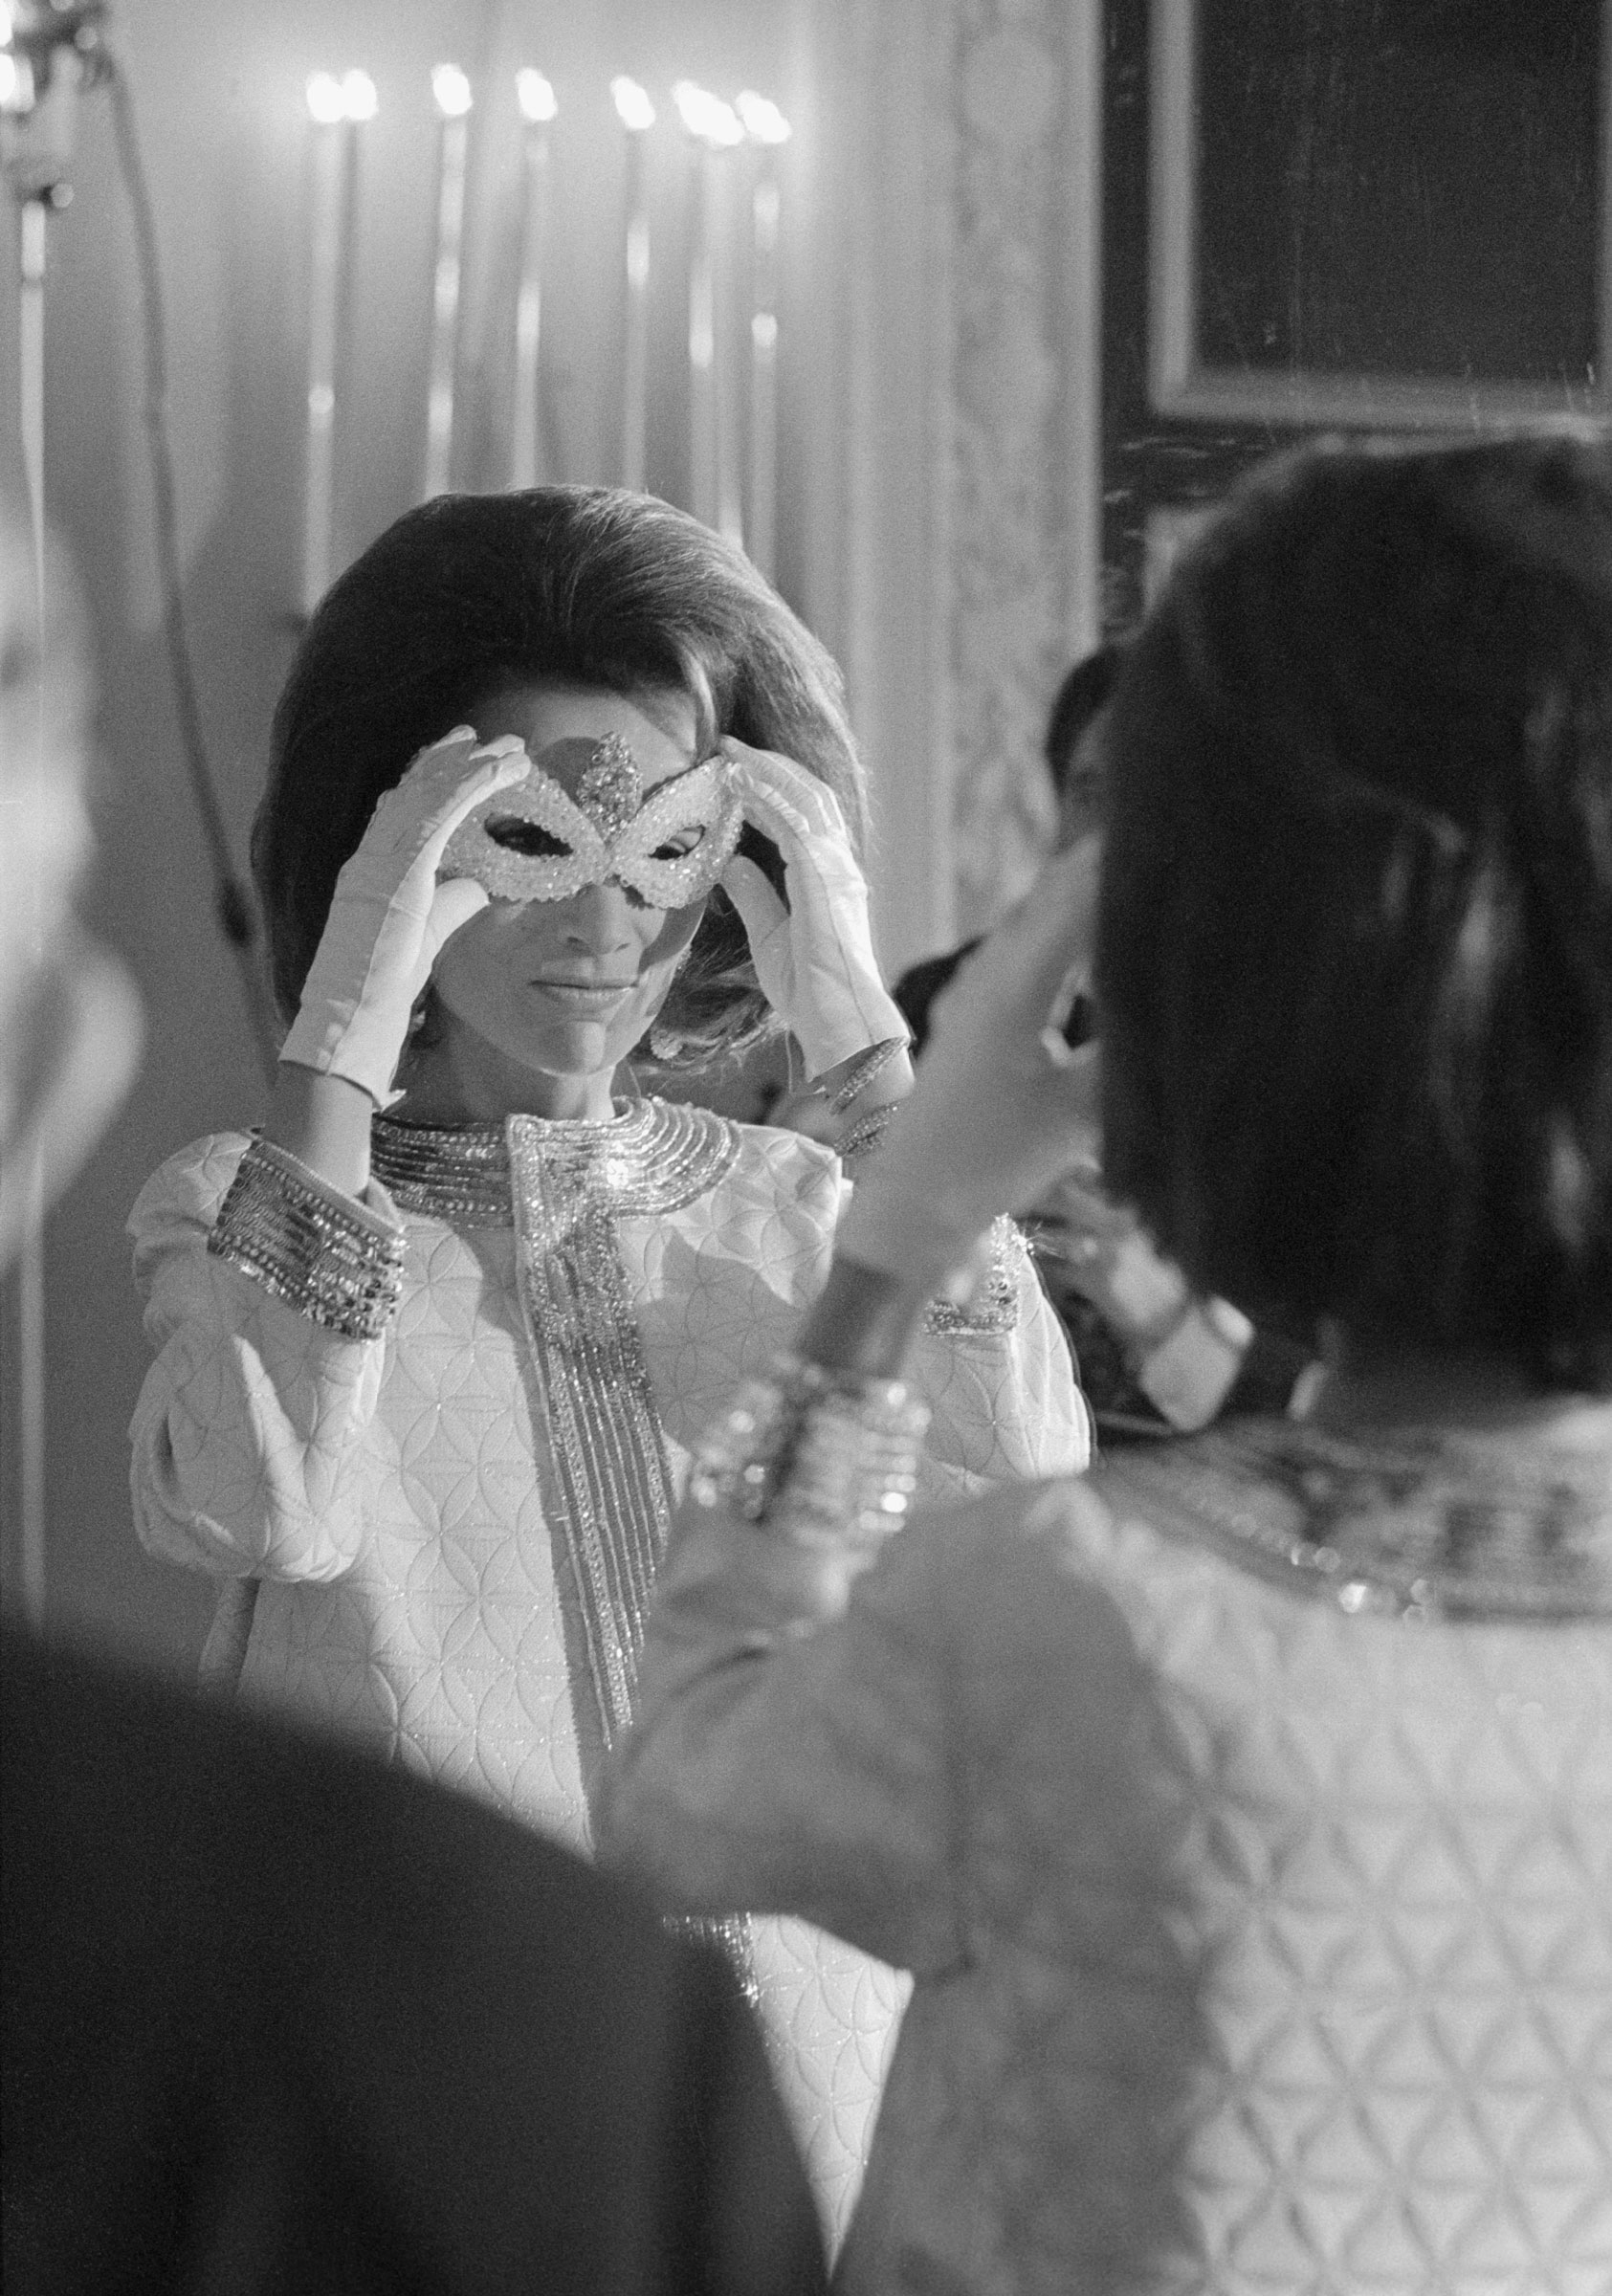 Lee Radziwill adjusts her mask after arrival at the ball.